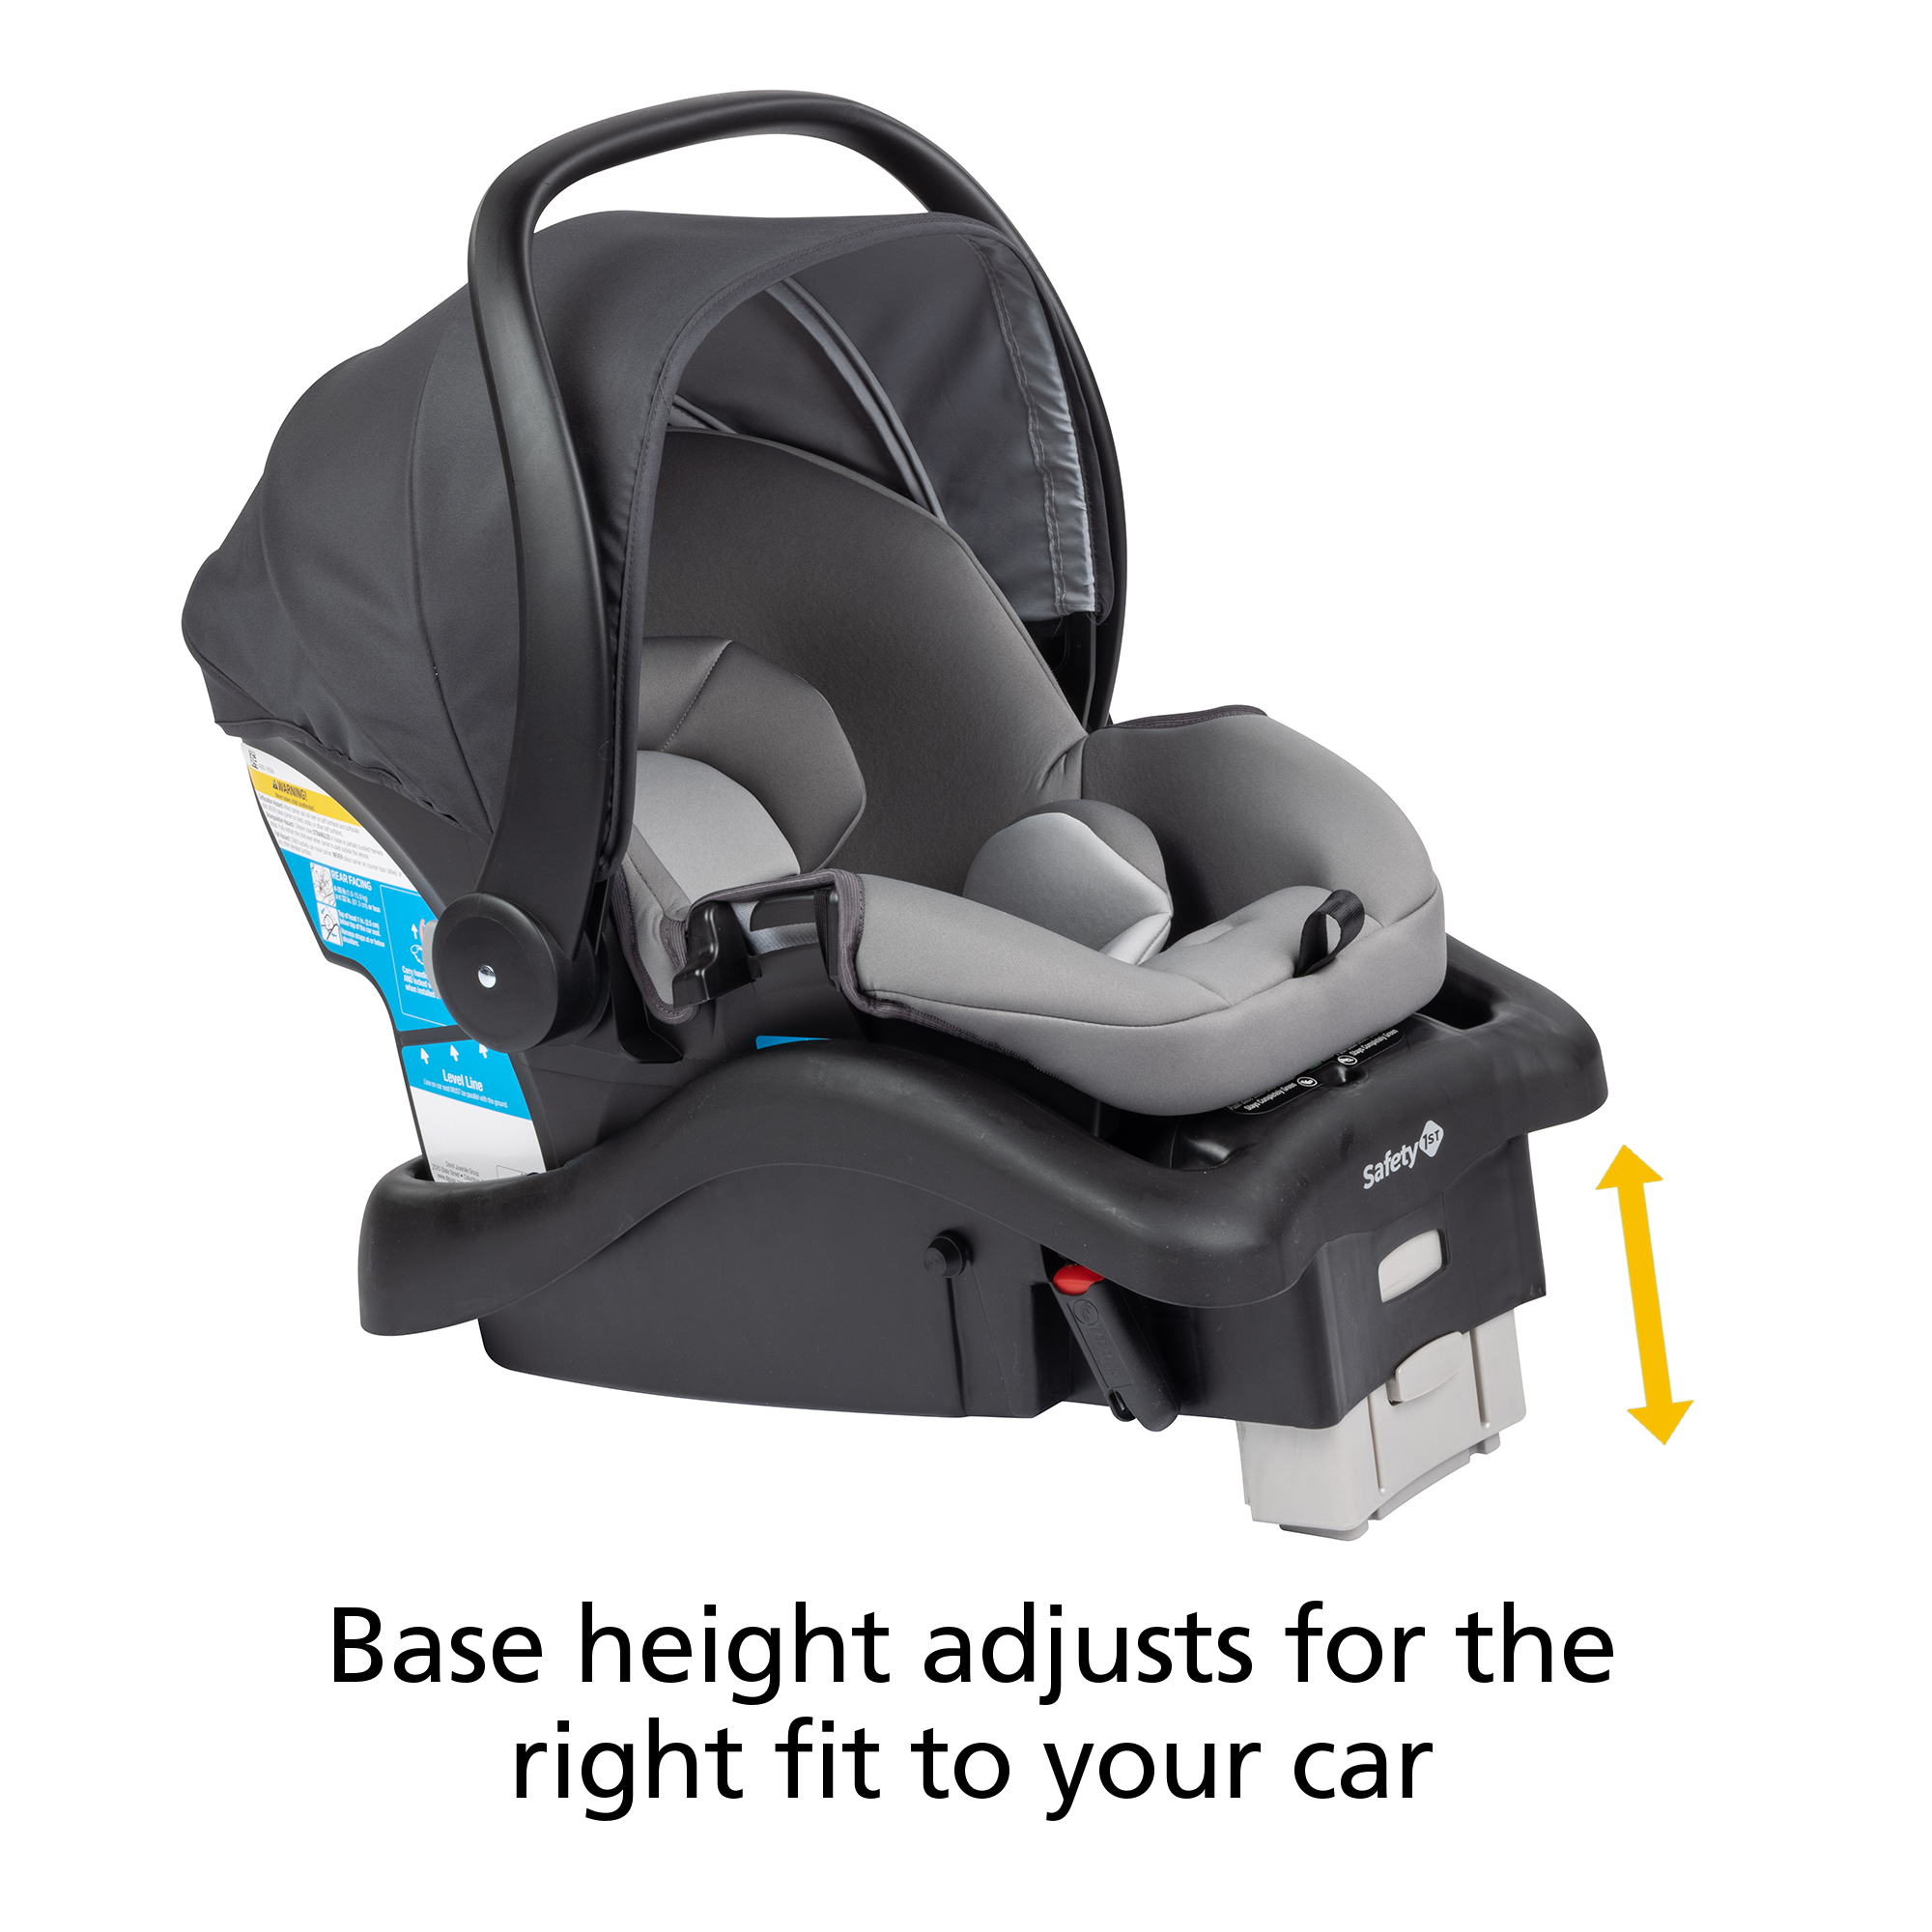 onBoard™35 SecureTech™ Infant Car Seat - base height adjusts for the right fit to your car